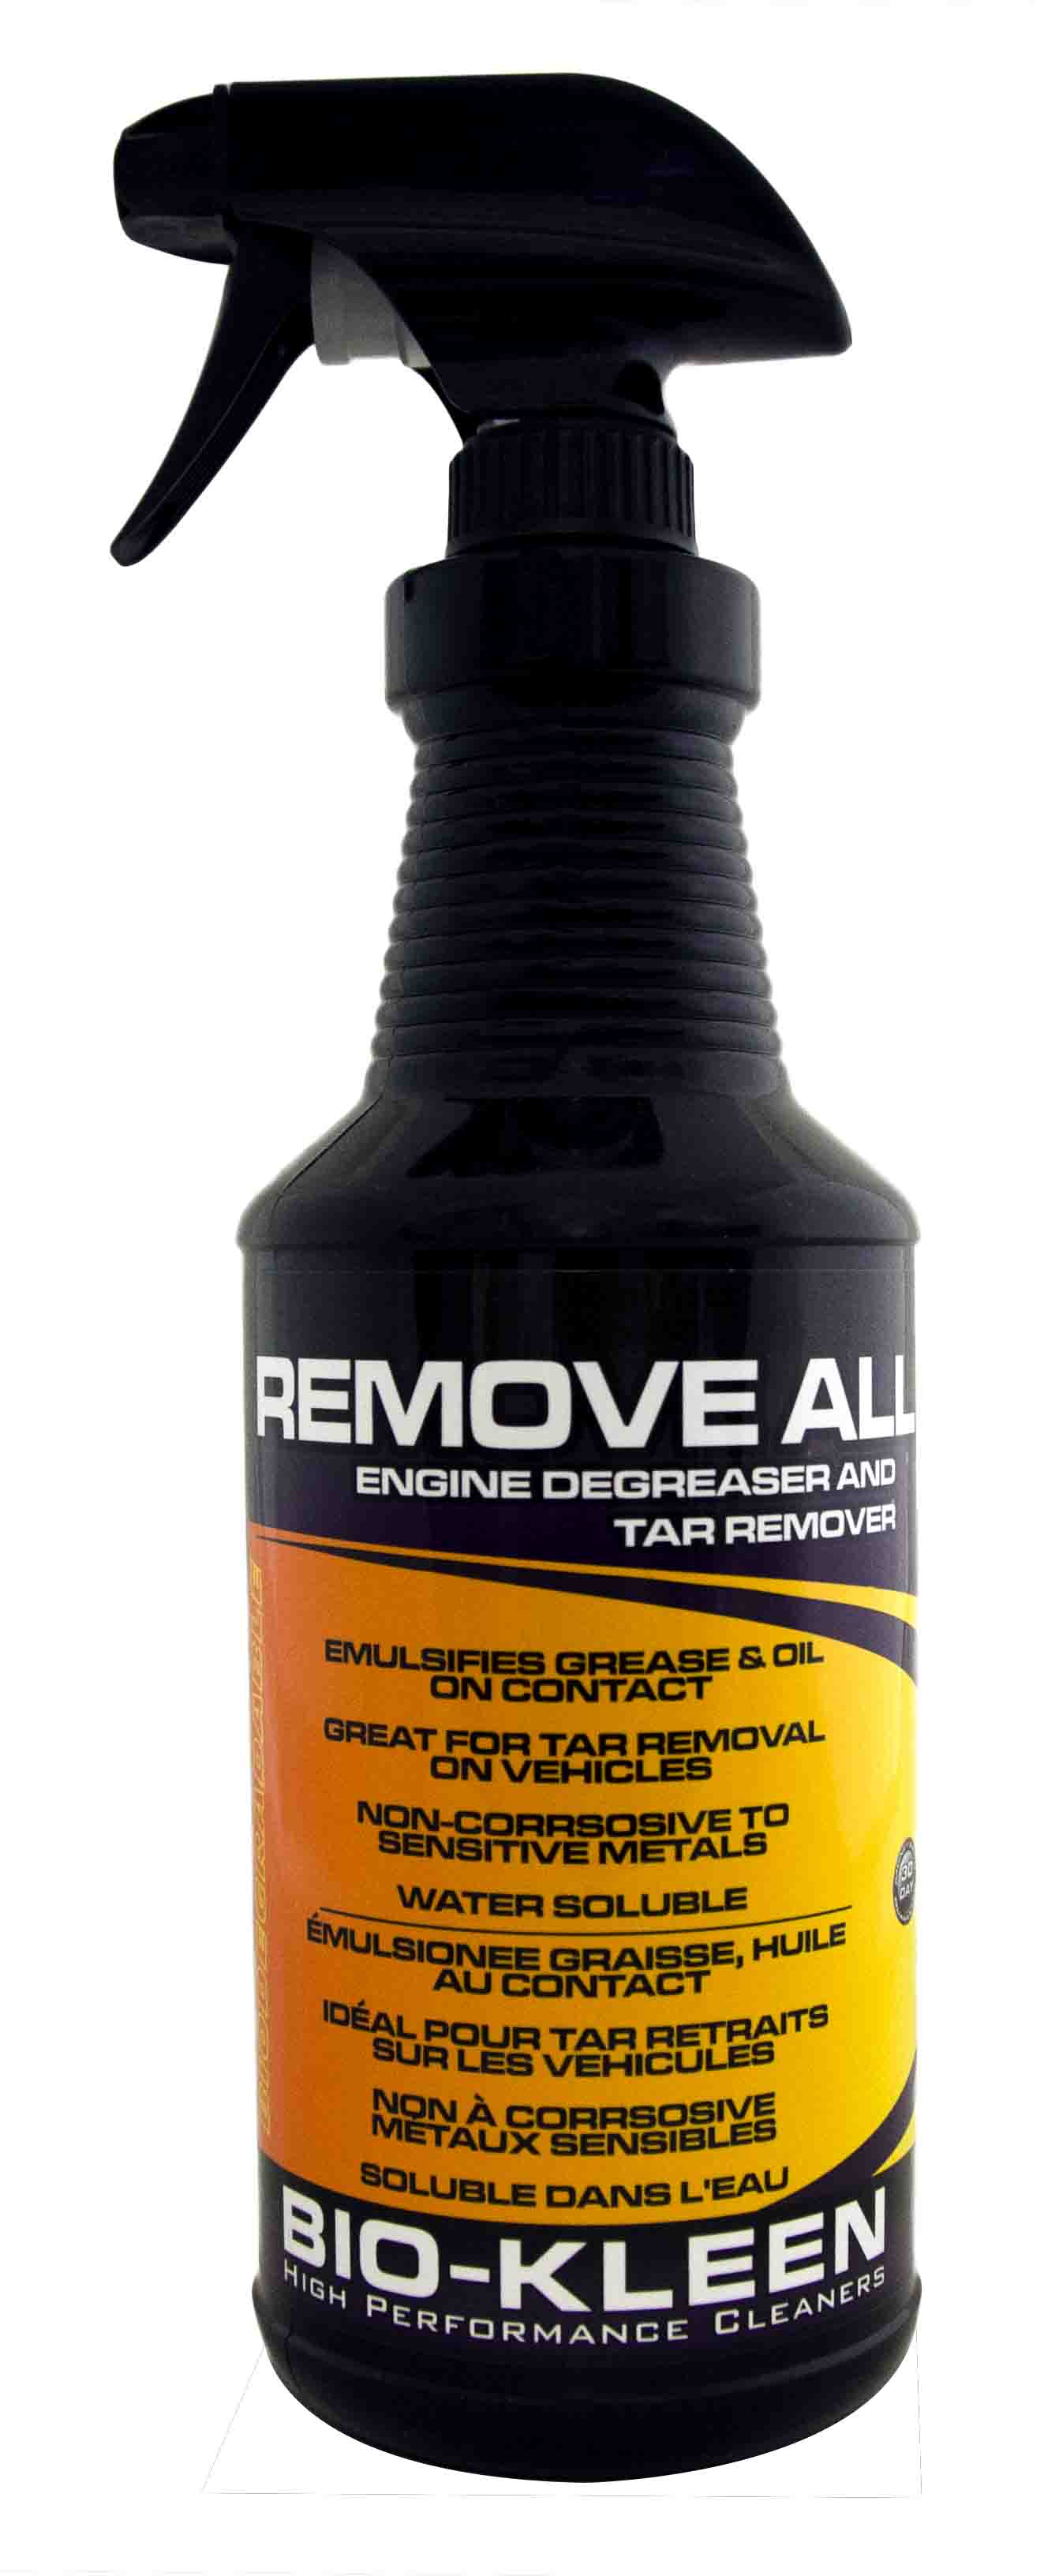 Car Degreaser  Buy engine degreaser for oil remover in form of